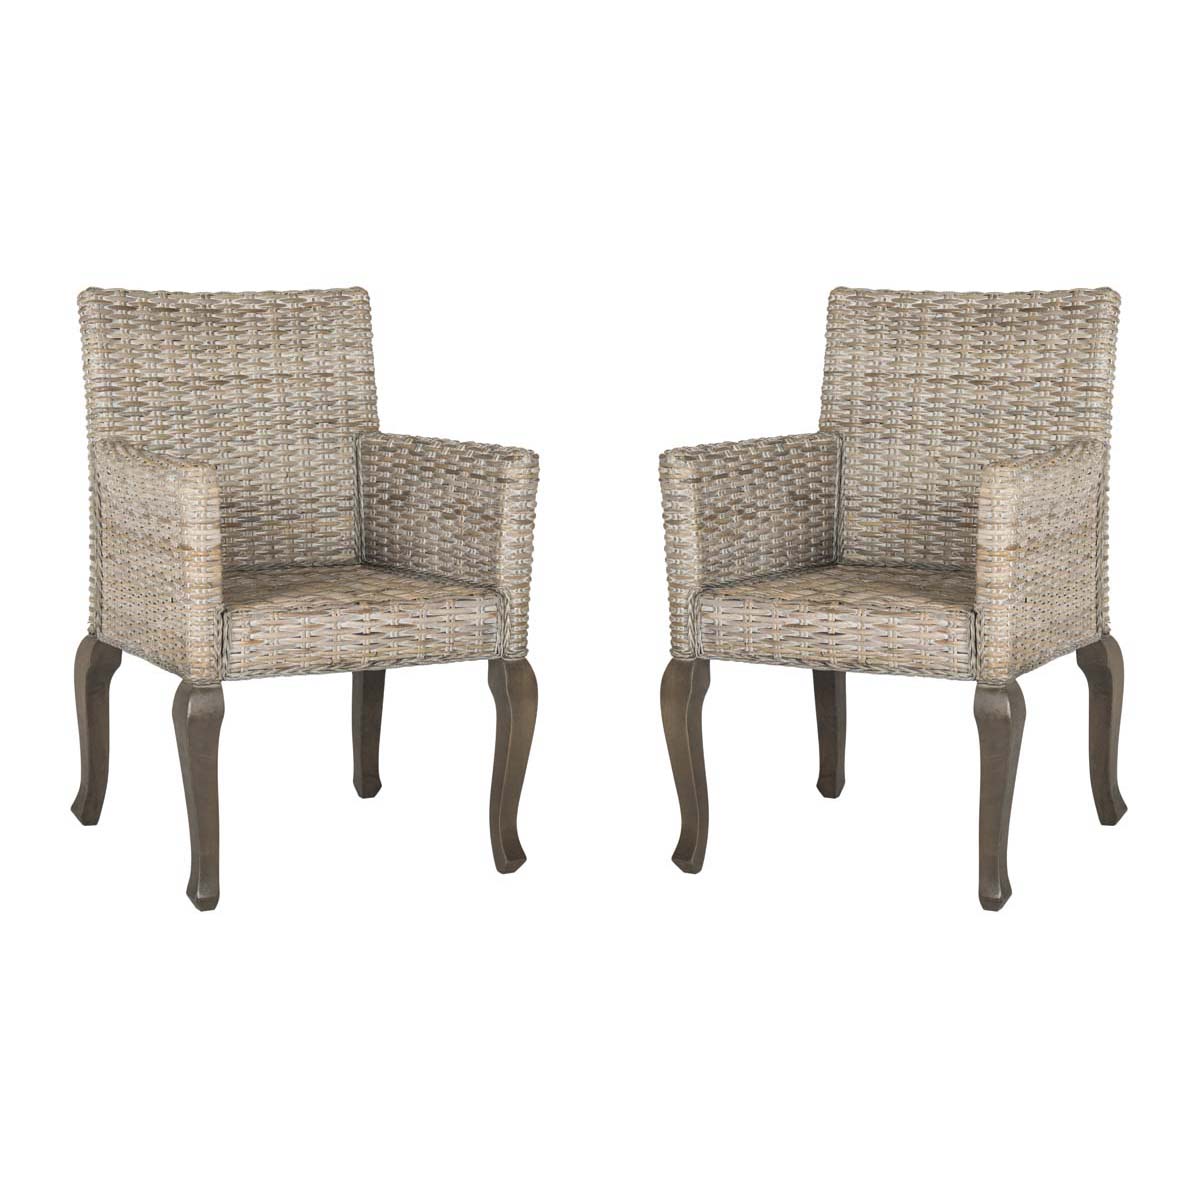 Safavieh Armando 18''H Wicker Dining Chair, SEA8019 - White Washed (Set of 2)